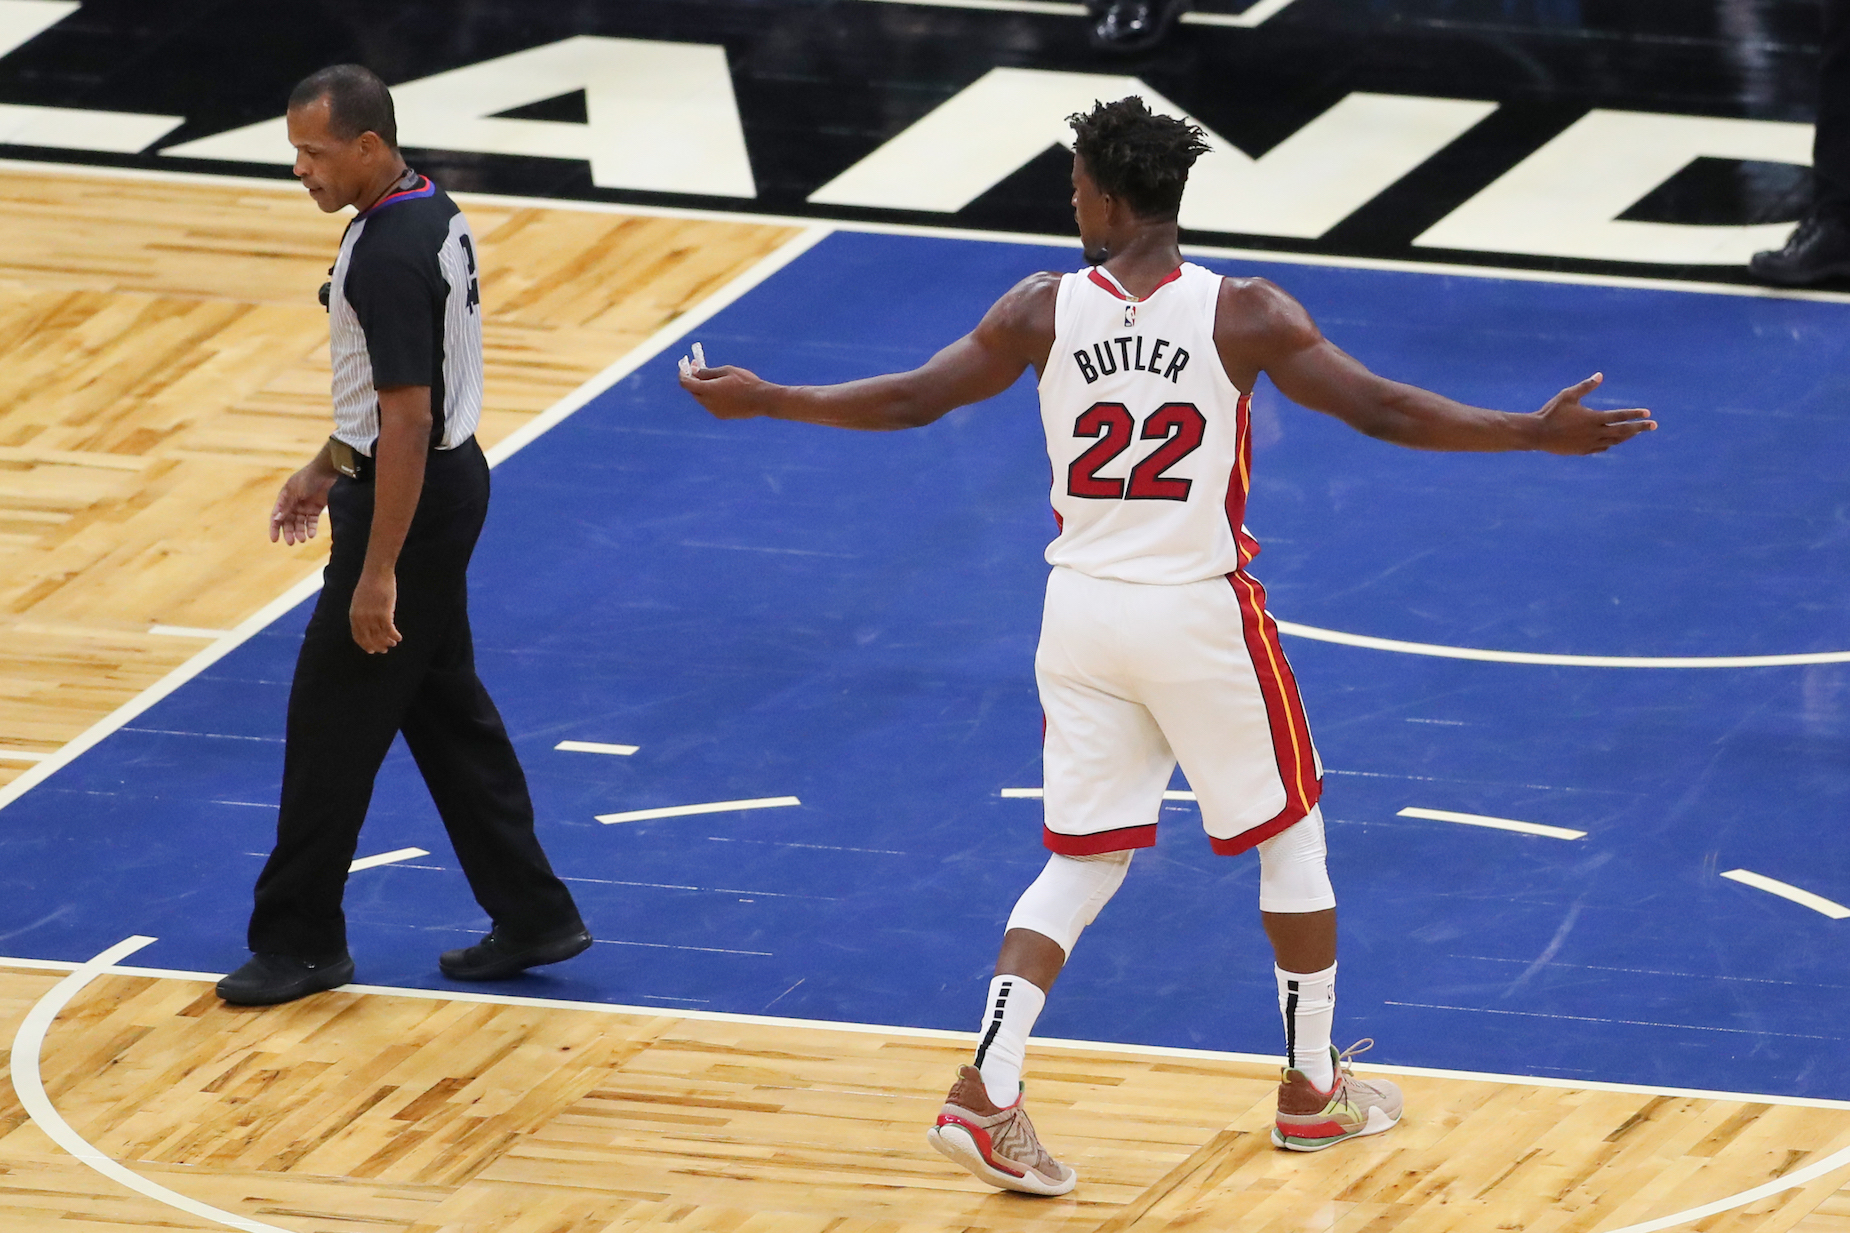 Jimmy Butler won't be playing for the Miami Heat when they meet the Milwaukee Bucks on Tuesday.